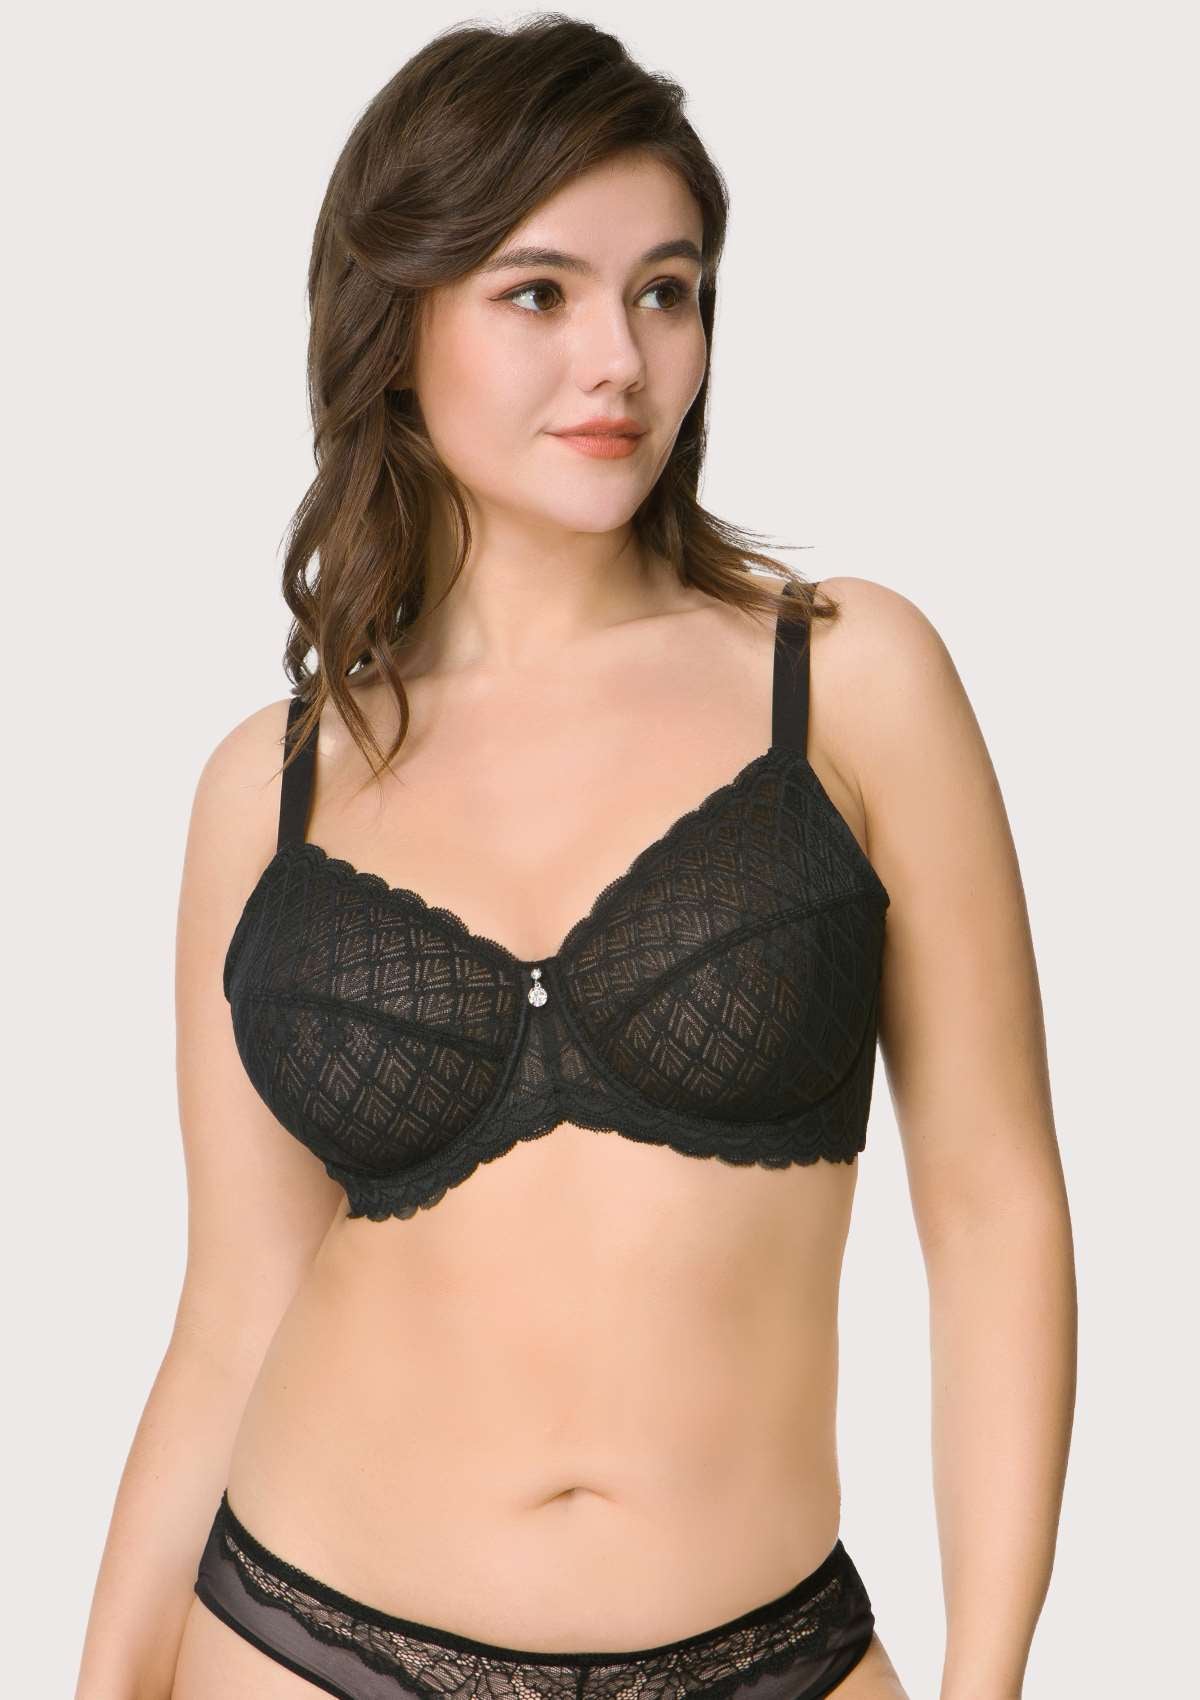 HSIA Plaid Full-Coverage Bra: Soft Bra With Thick Straps - Light Pink / 38 / C